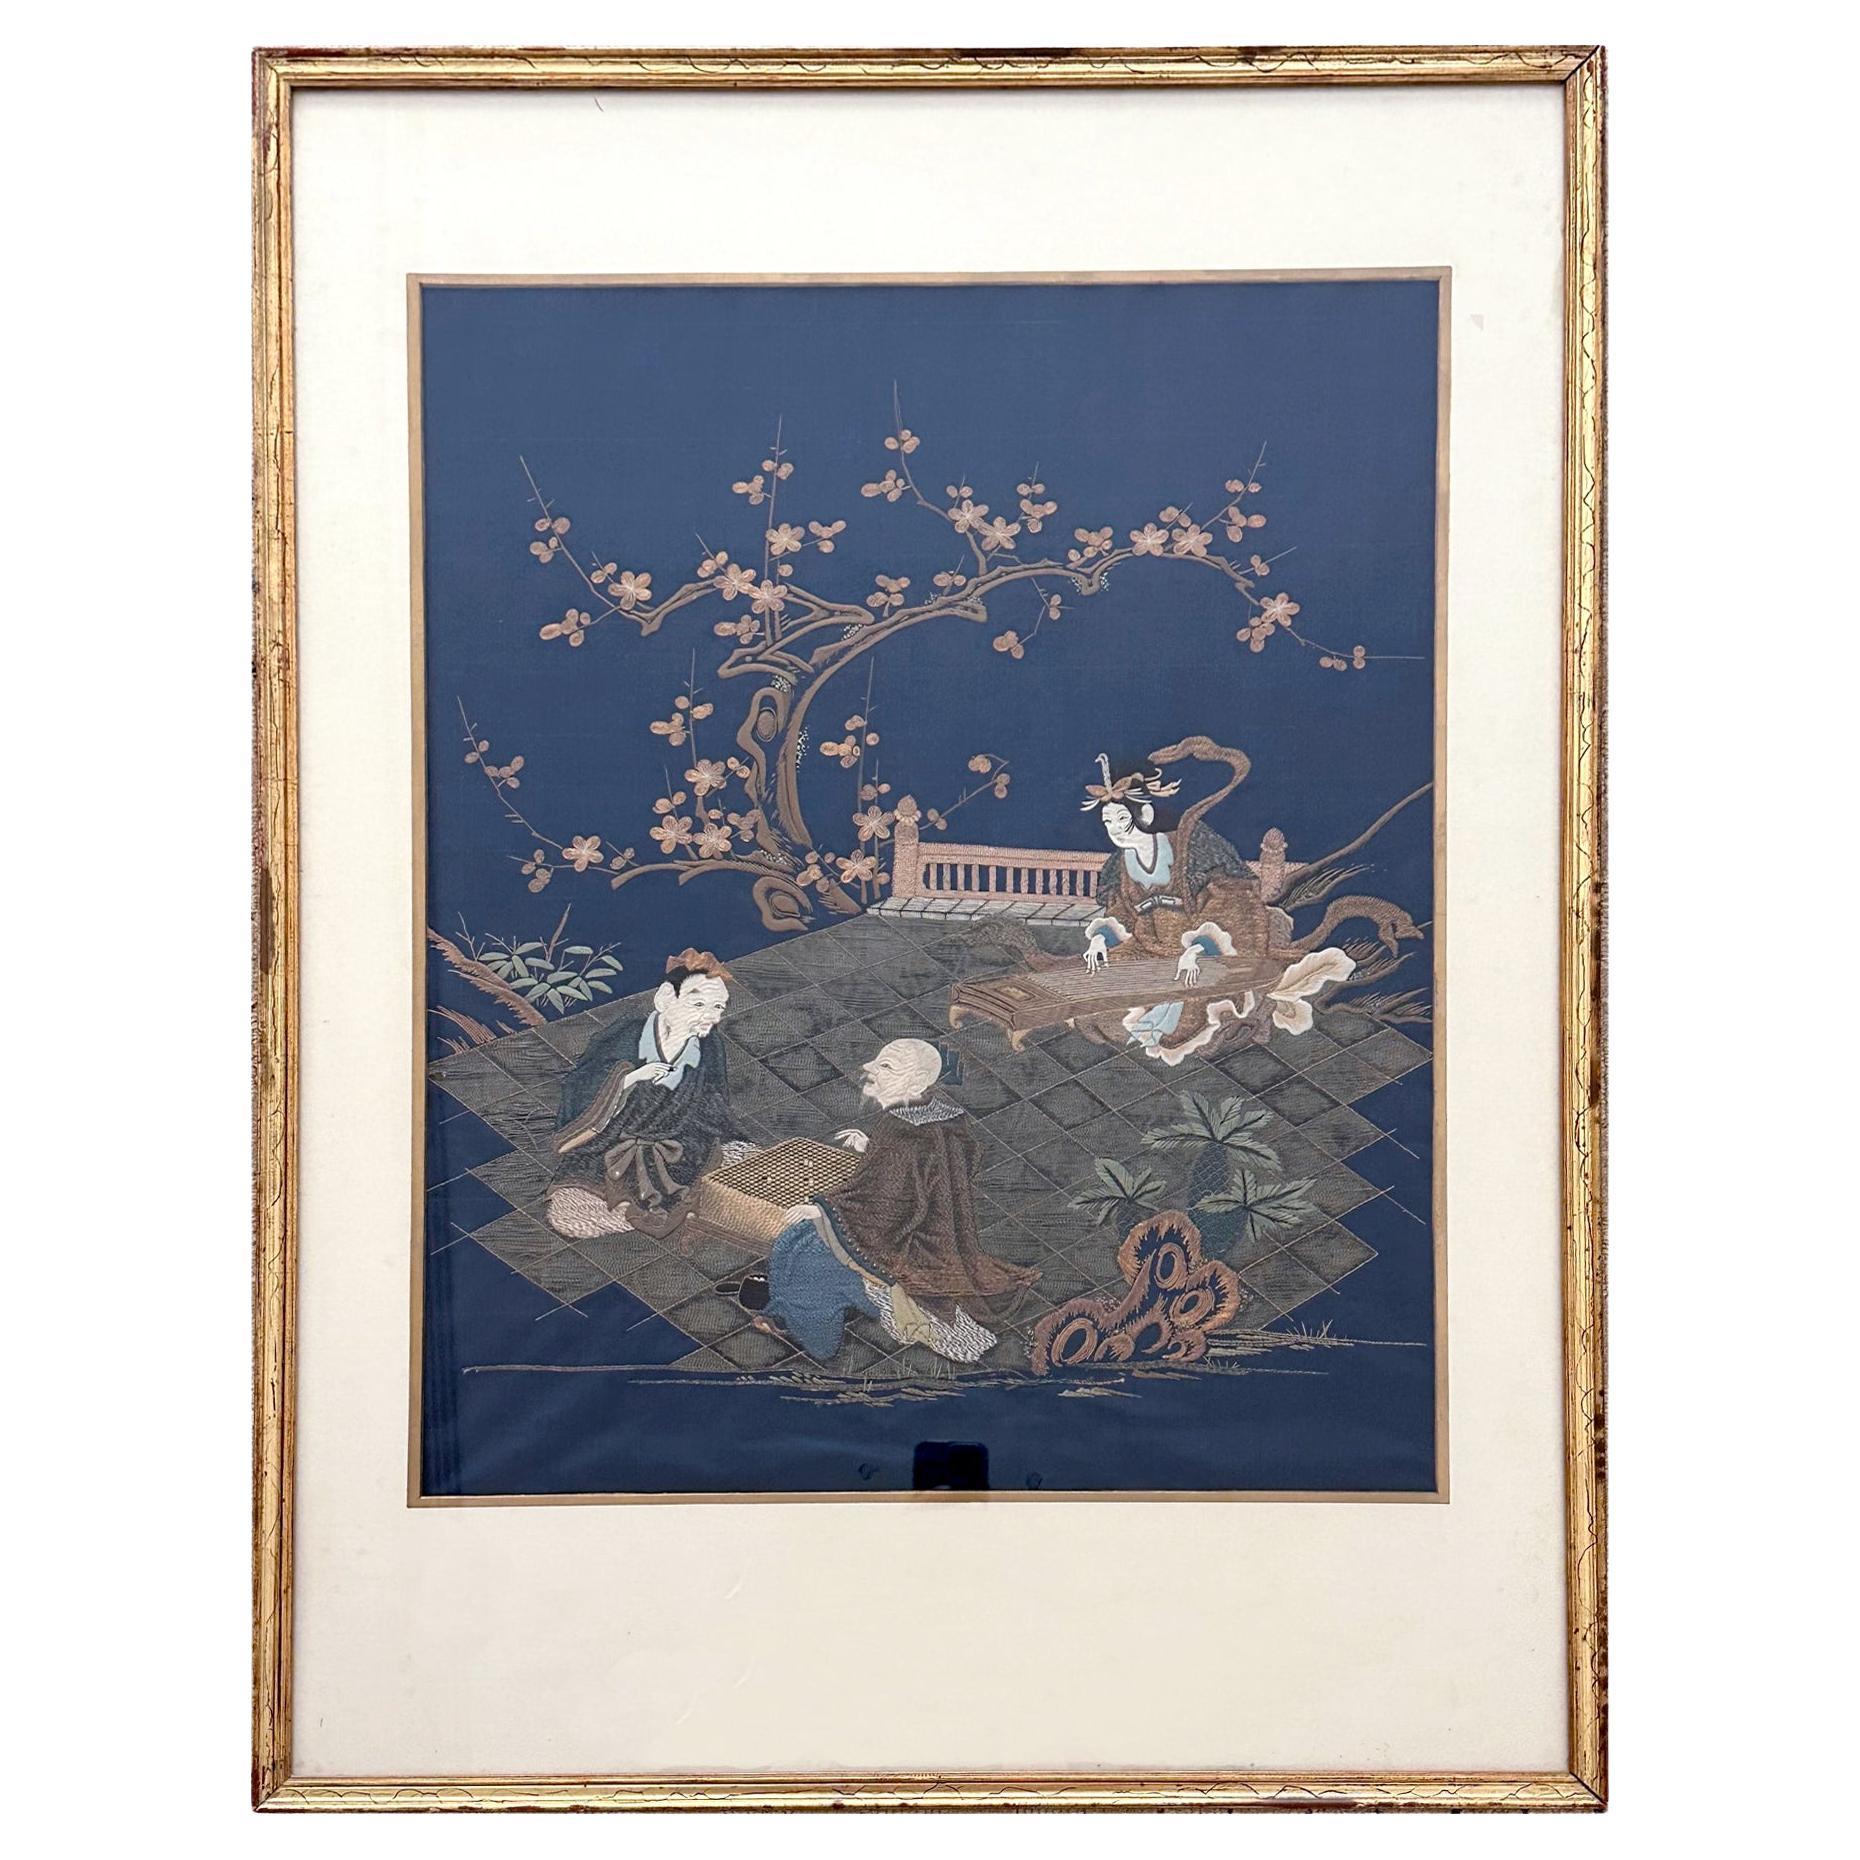 Framed Antique Japanese Embroidery Fukusa Textile Panel For Sale